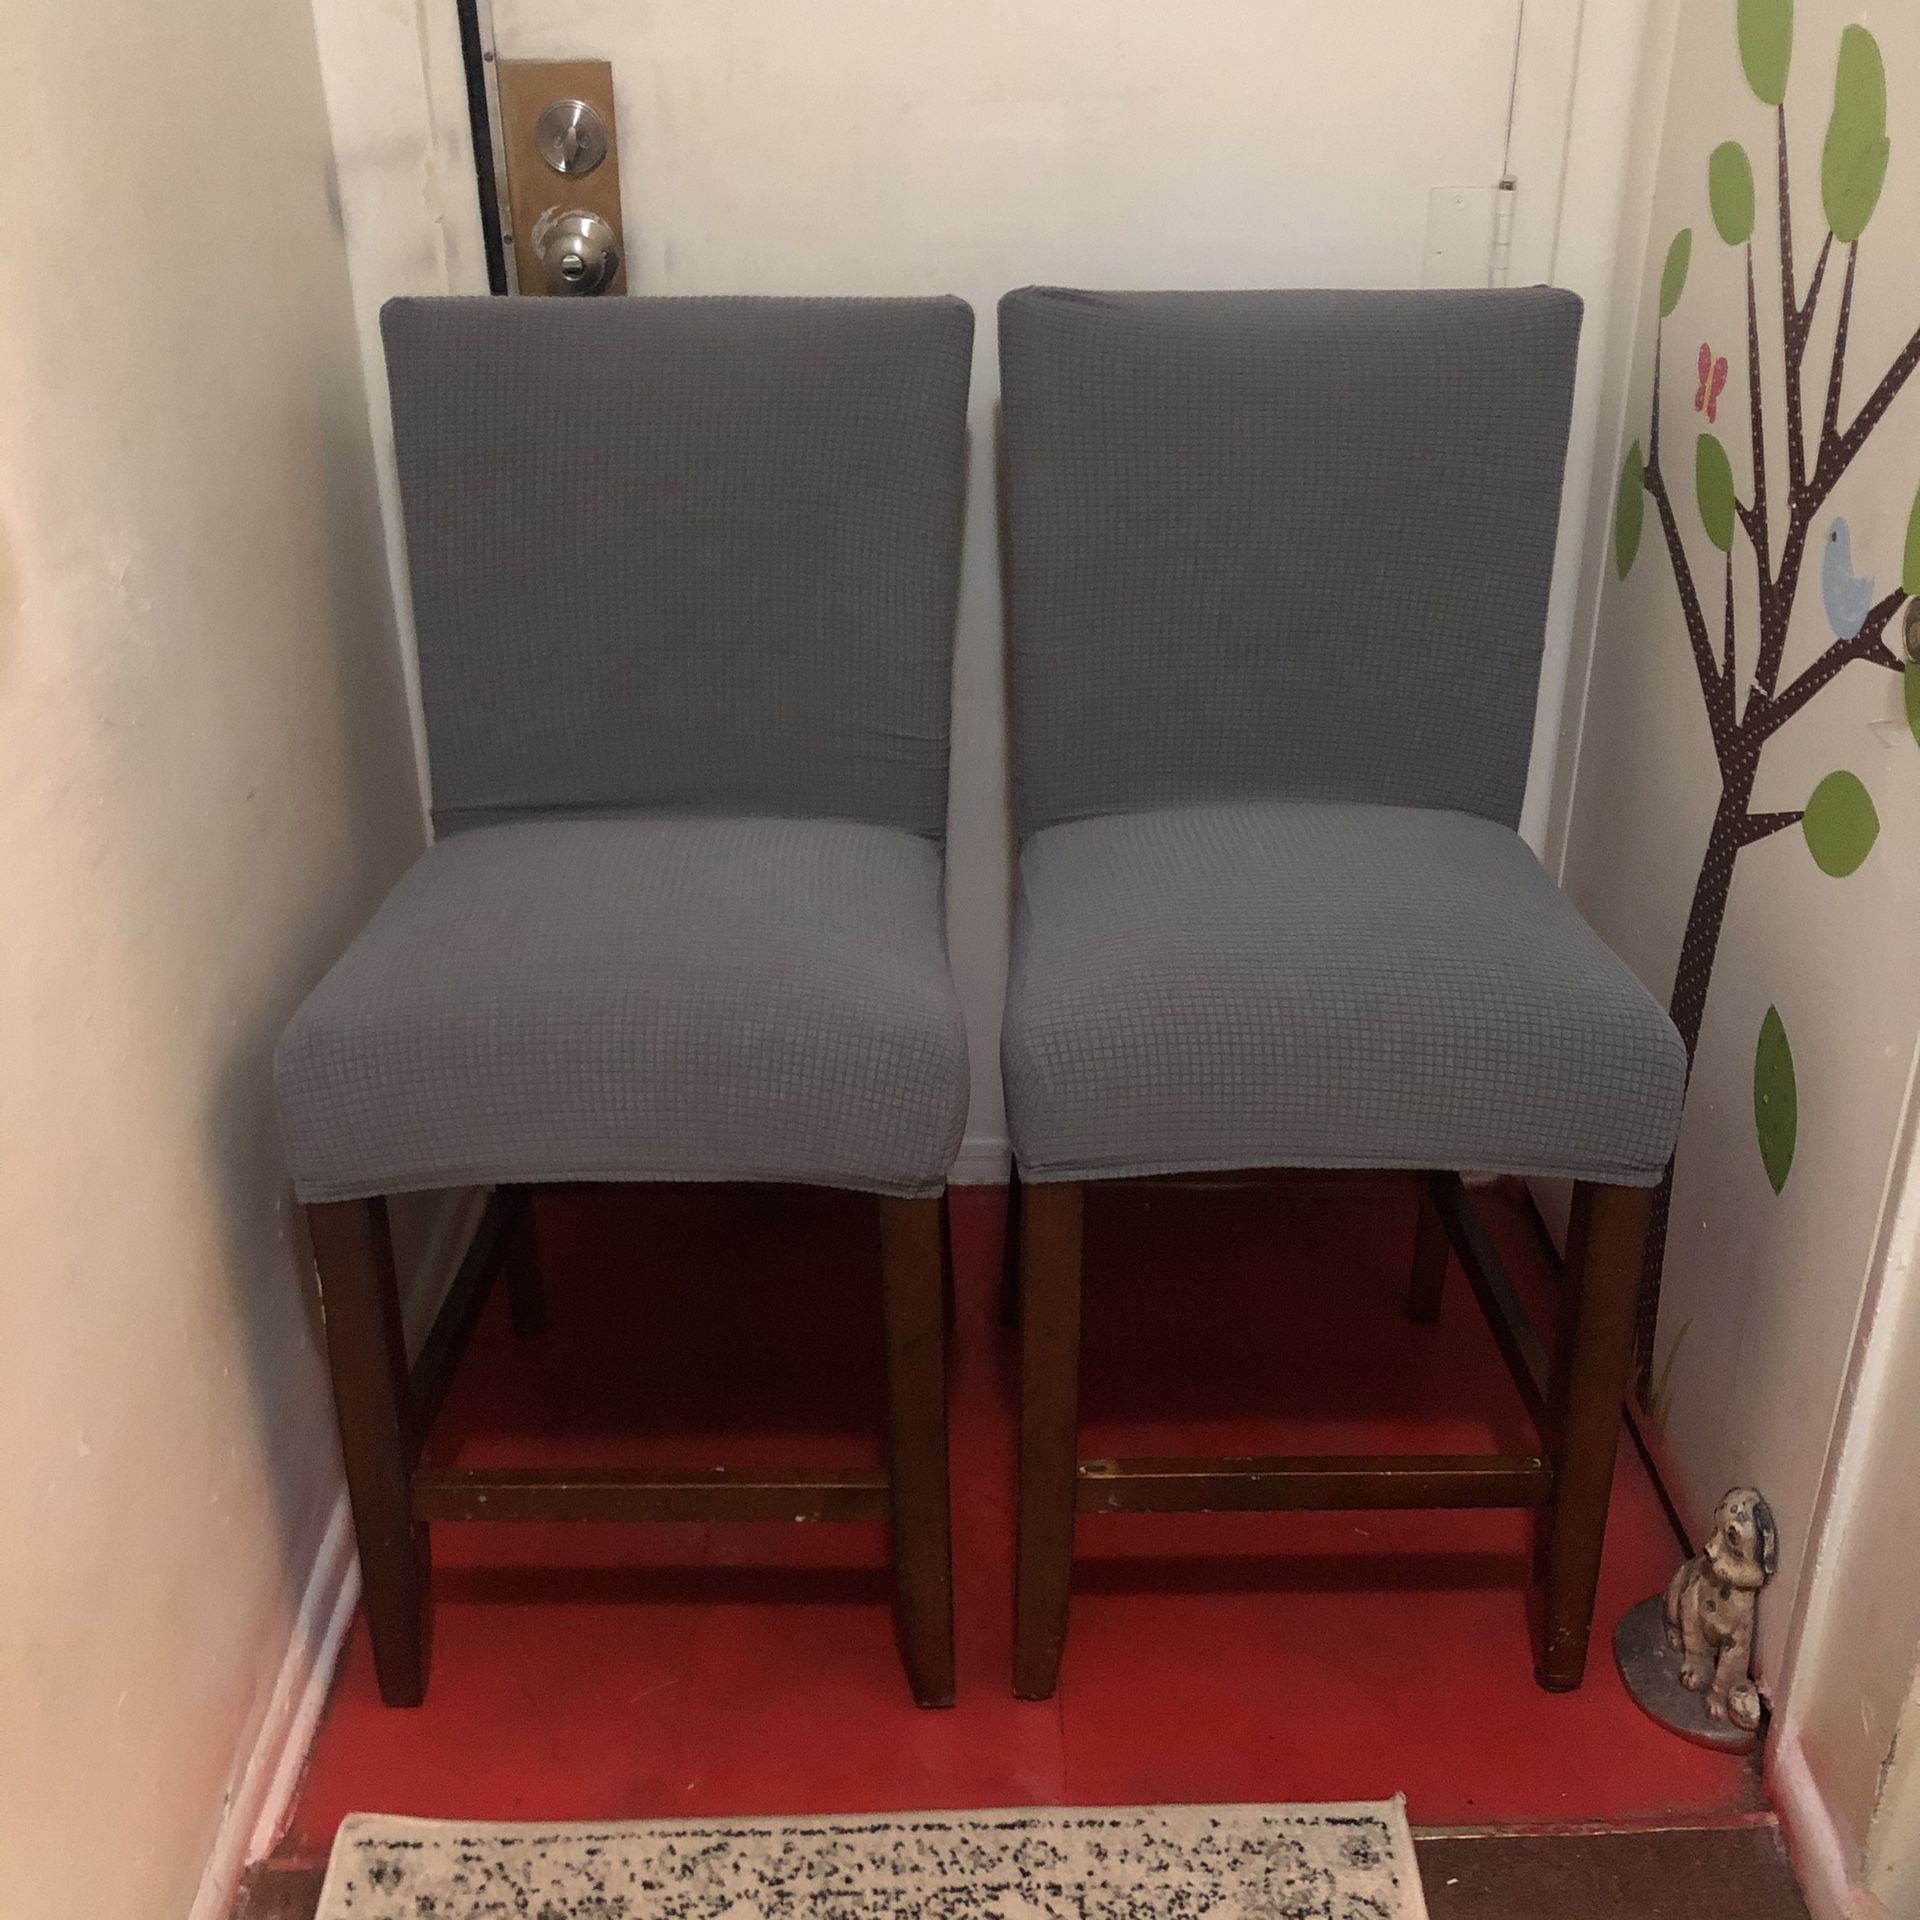 Counter height bar chairs